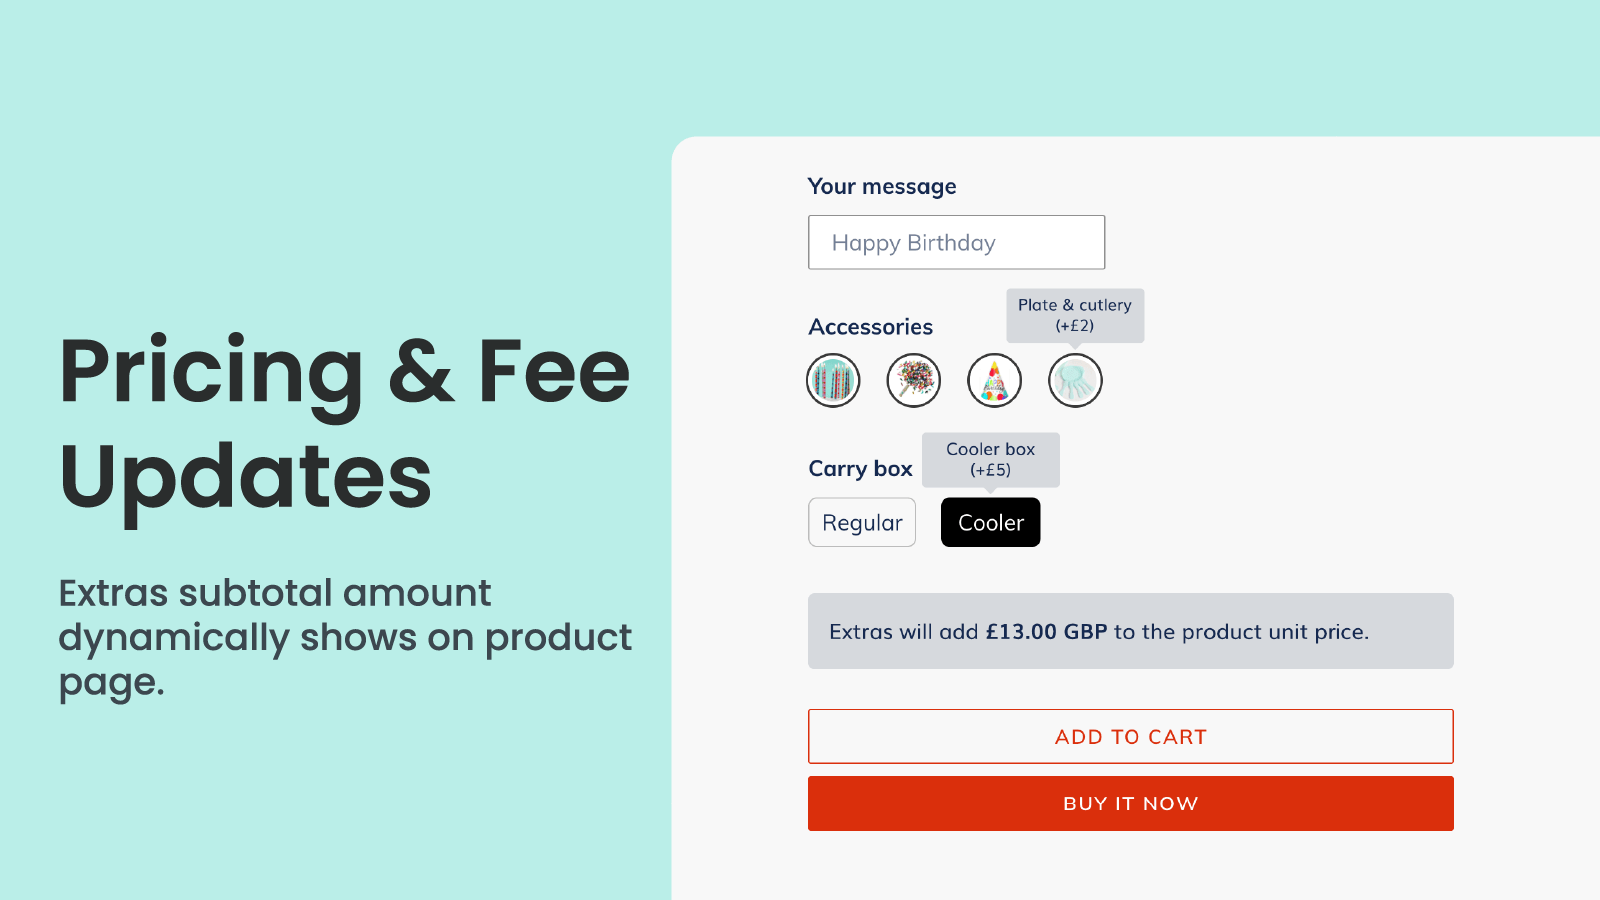 Pricing and fee updates with subtotal amount on product page